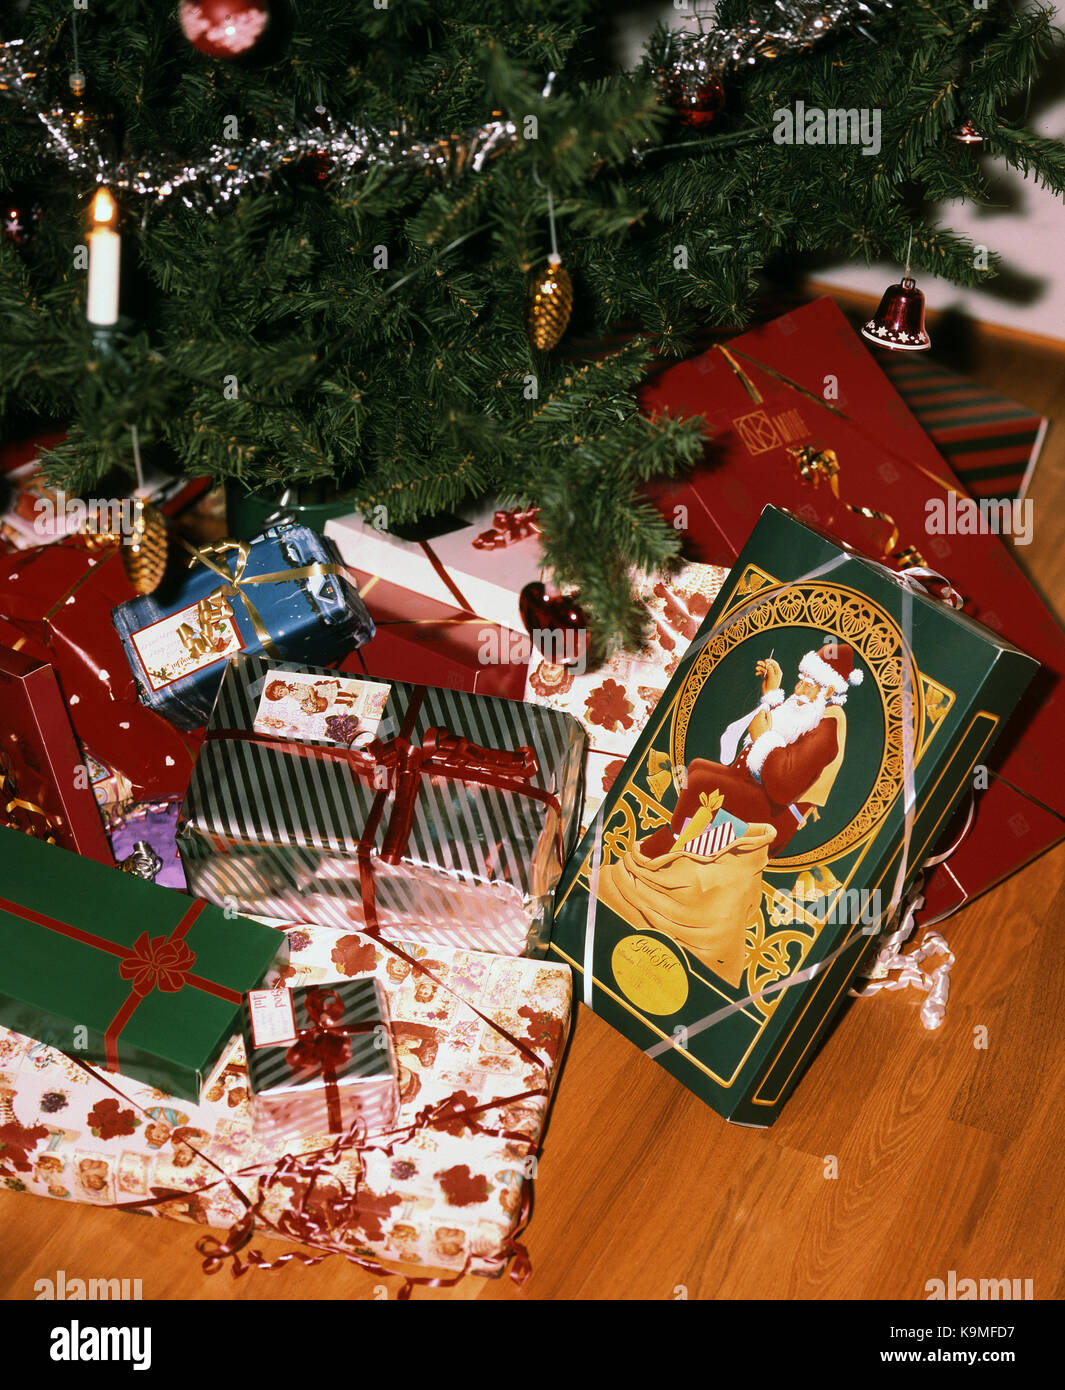 CHRISTMAS PACKAGE under the Christmas tree 2015 Stock Photo